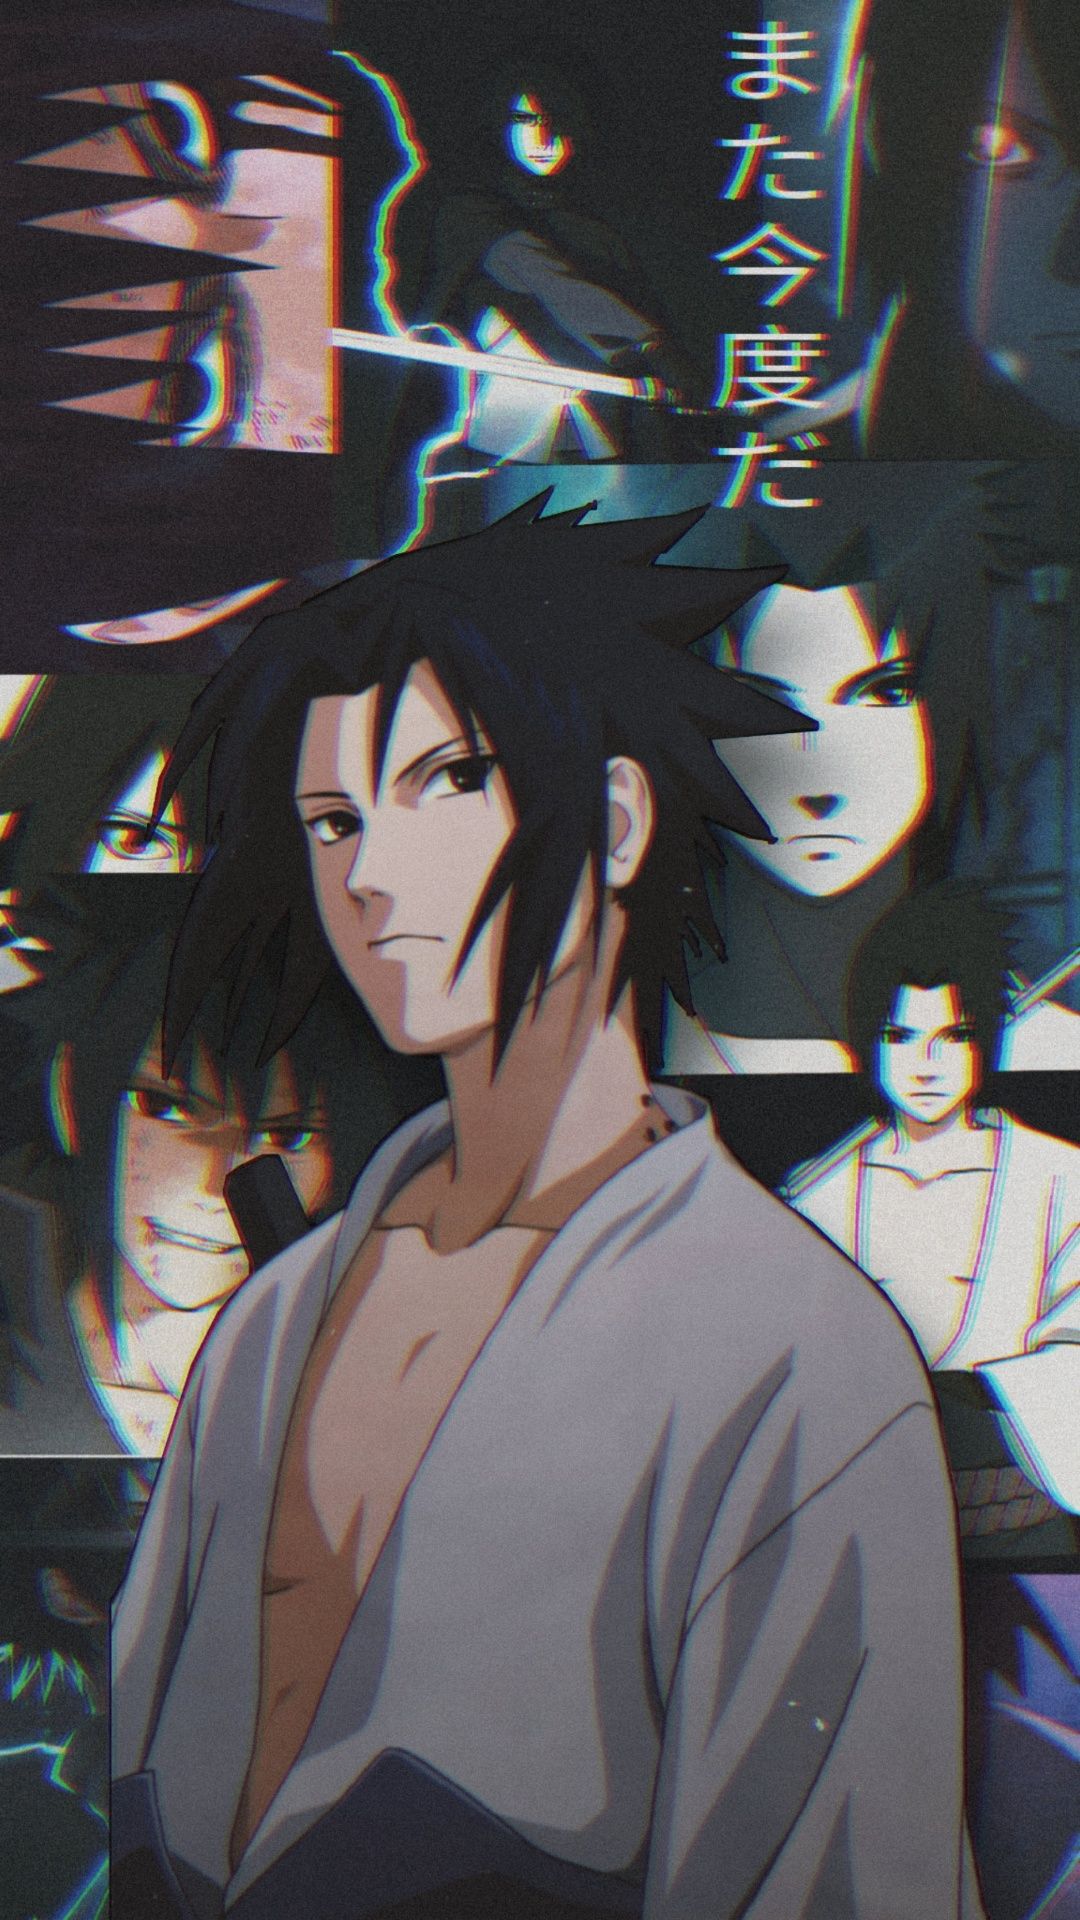 IPhone wallpaper anime aesthetic sasuke with high-resolution 1080x1920 pixel. You can use this wallpaper for your iPhone 5, 6, 7, 8, X, XS, XR backgrounds, Mobile Screensaver, or iPad Lock Screen - Sasuke Uchiha